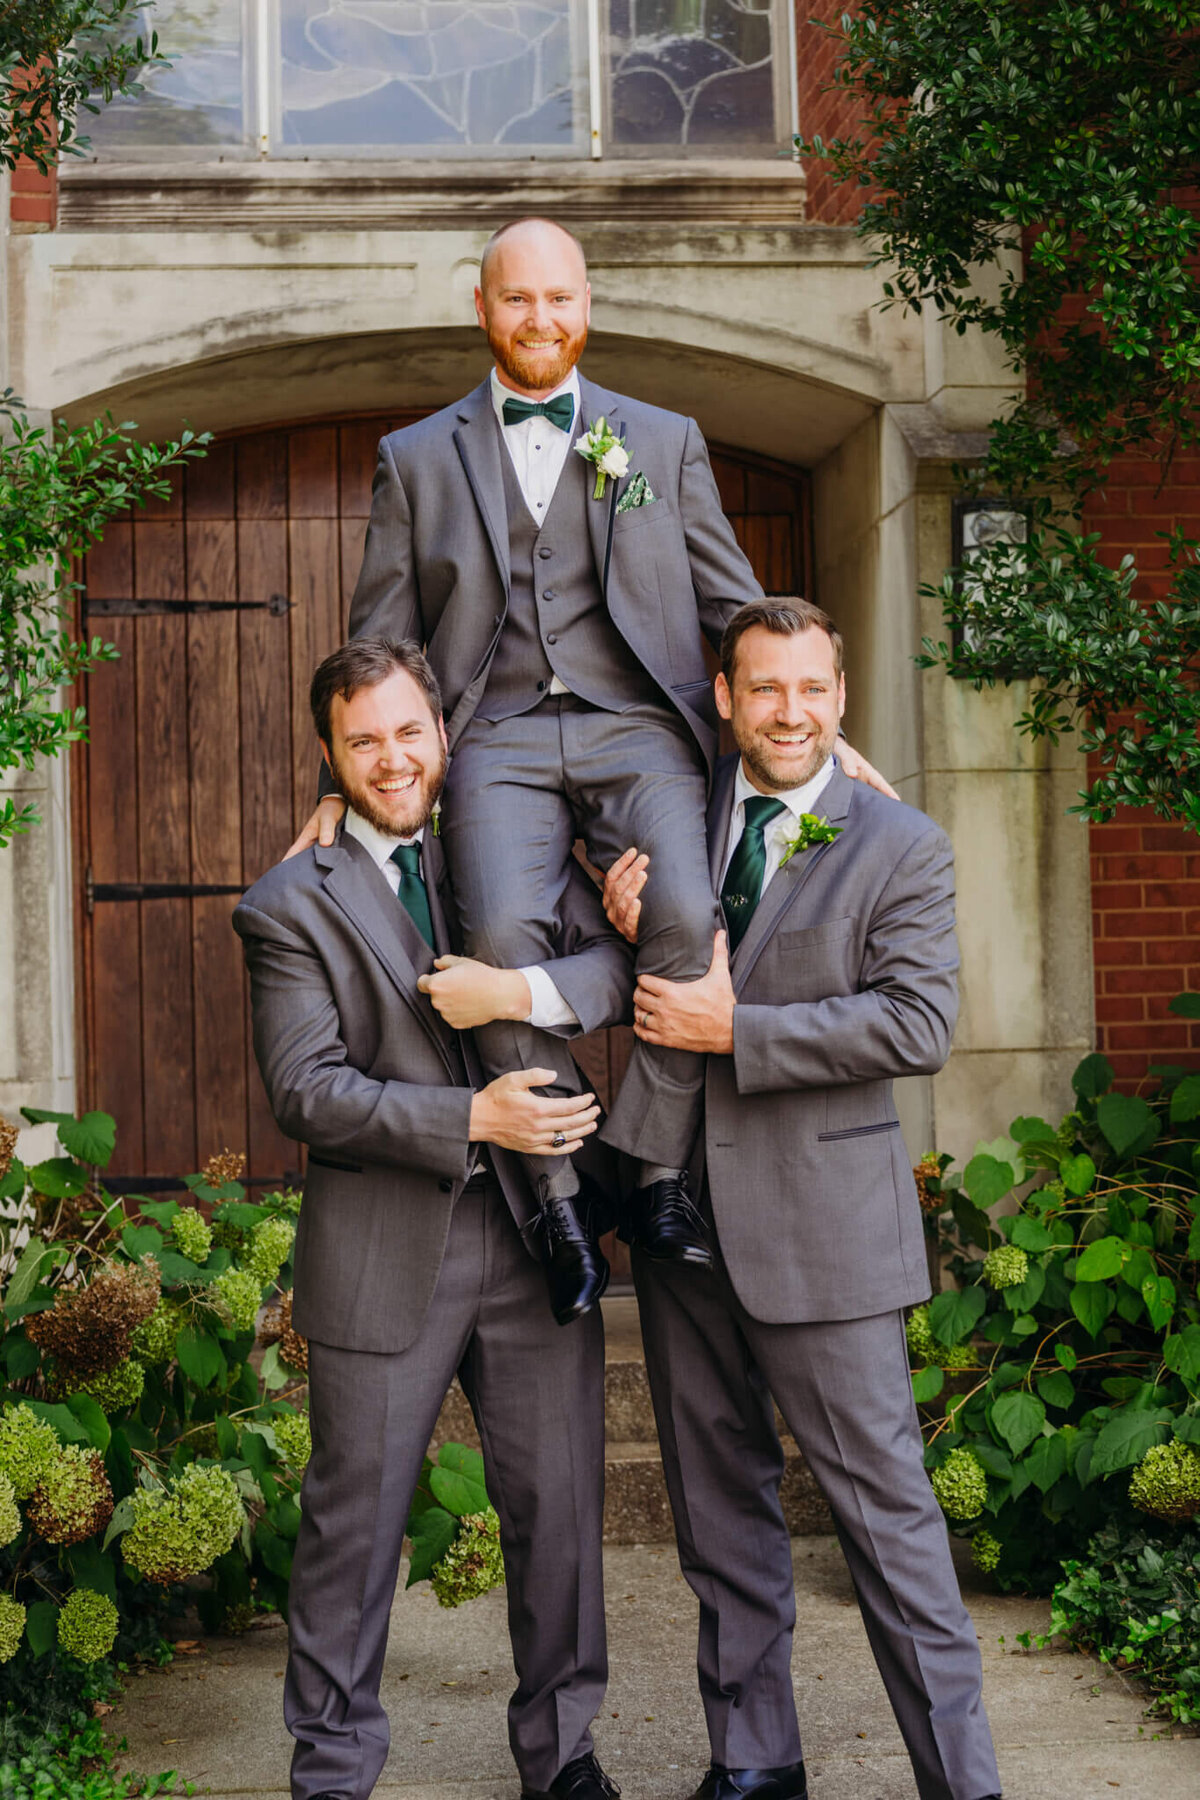 photo of a Groom on two groomsmen shoulders while everybody laughs in front of a wooden door and hydrangea bushes